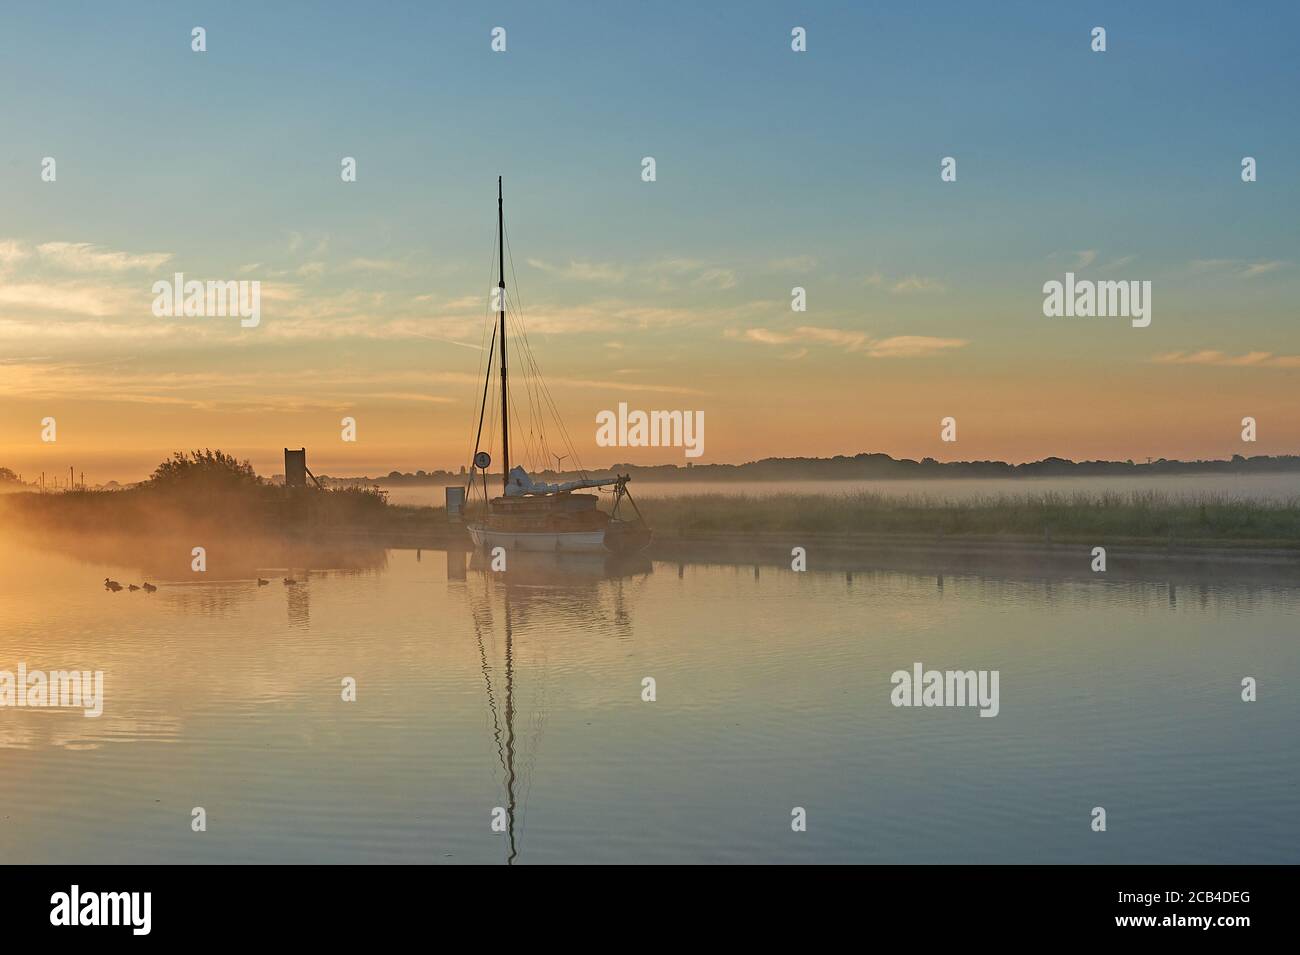 Potter Heigham, Norfolk Broads and a sailing boat moored on the River Thurne during a misty summer sunrise. Stock Photo